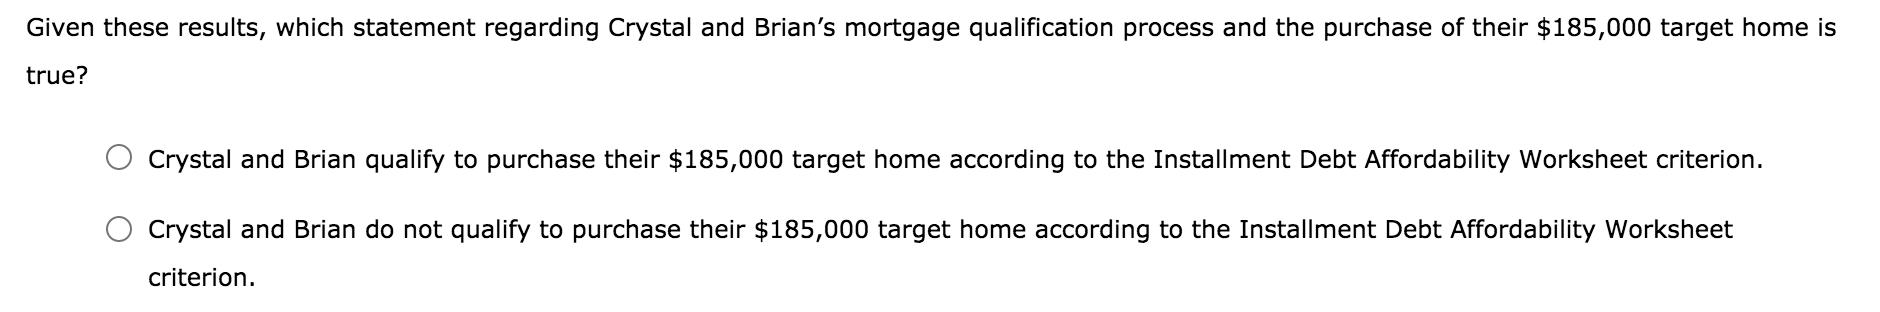 Given these results, which statement regarding Crystal and Brians mortgage qualification process and the purchase of their $